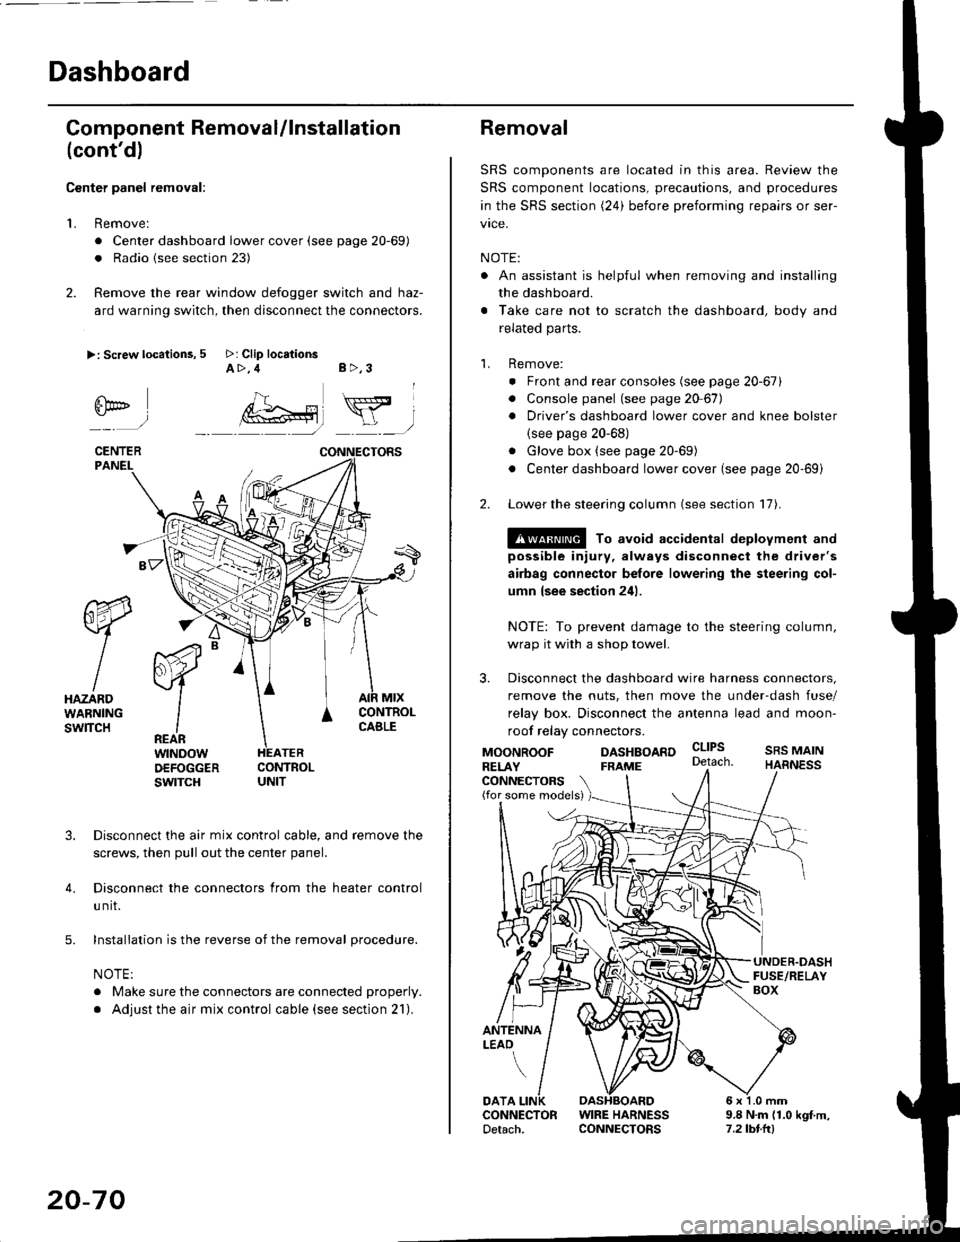 HONDA CIVIC 1996 6.G Workshop Manual Dashboard
Gomponent Removal/lnstallation
(contd)
Center panel removal:
1. Remove:
. Center dashboard lower cover (see page 20-69)
. Radio {see section 23)
2. Remove the rear window defogger switch an